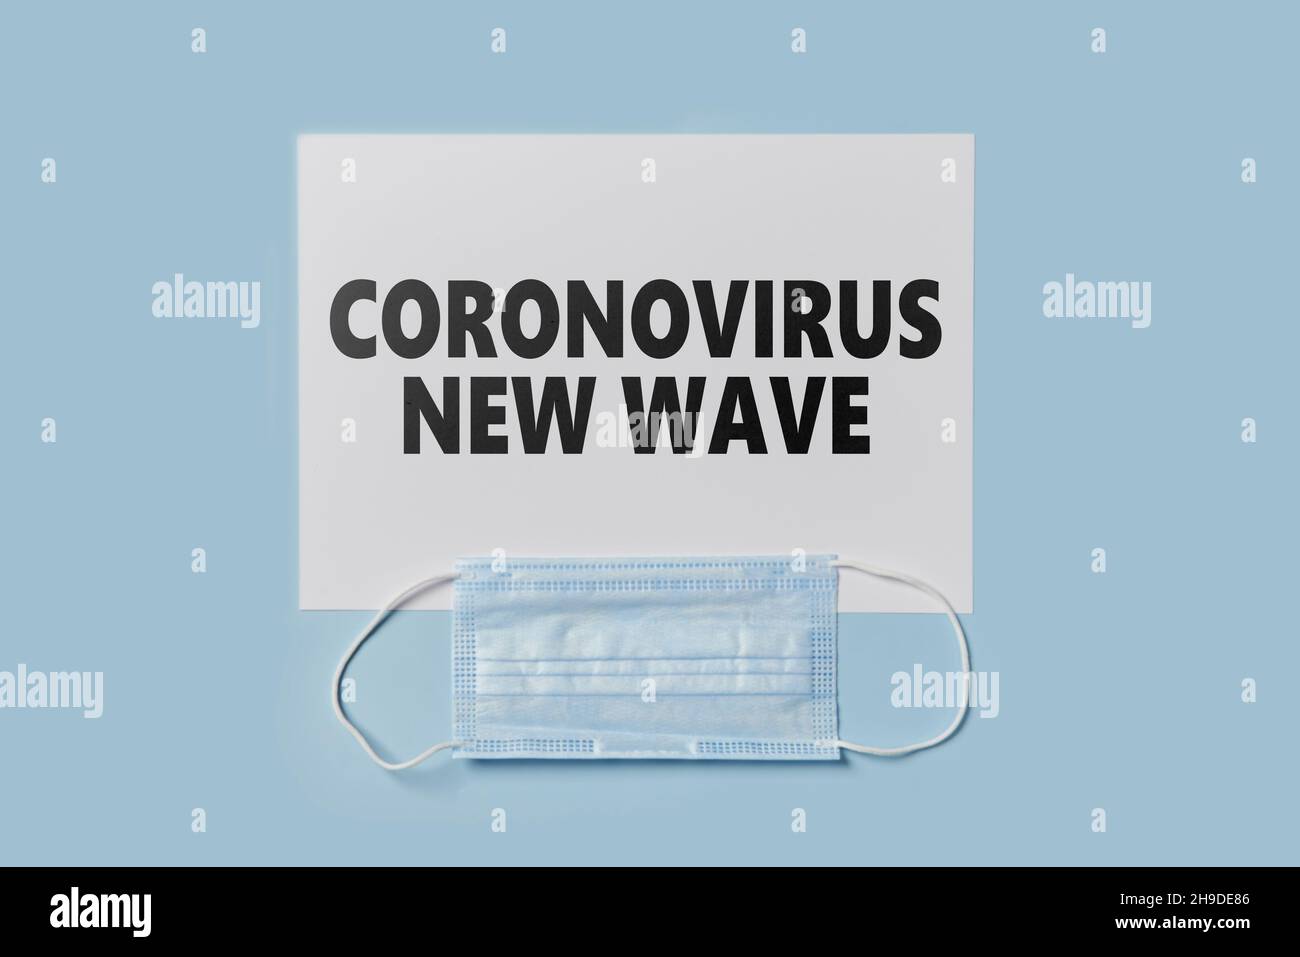 Coronavirus new wave text on paper and face mask. Lockdown, quarantine due to new Covid-19 variant Stock Photo